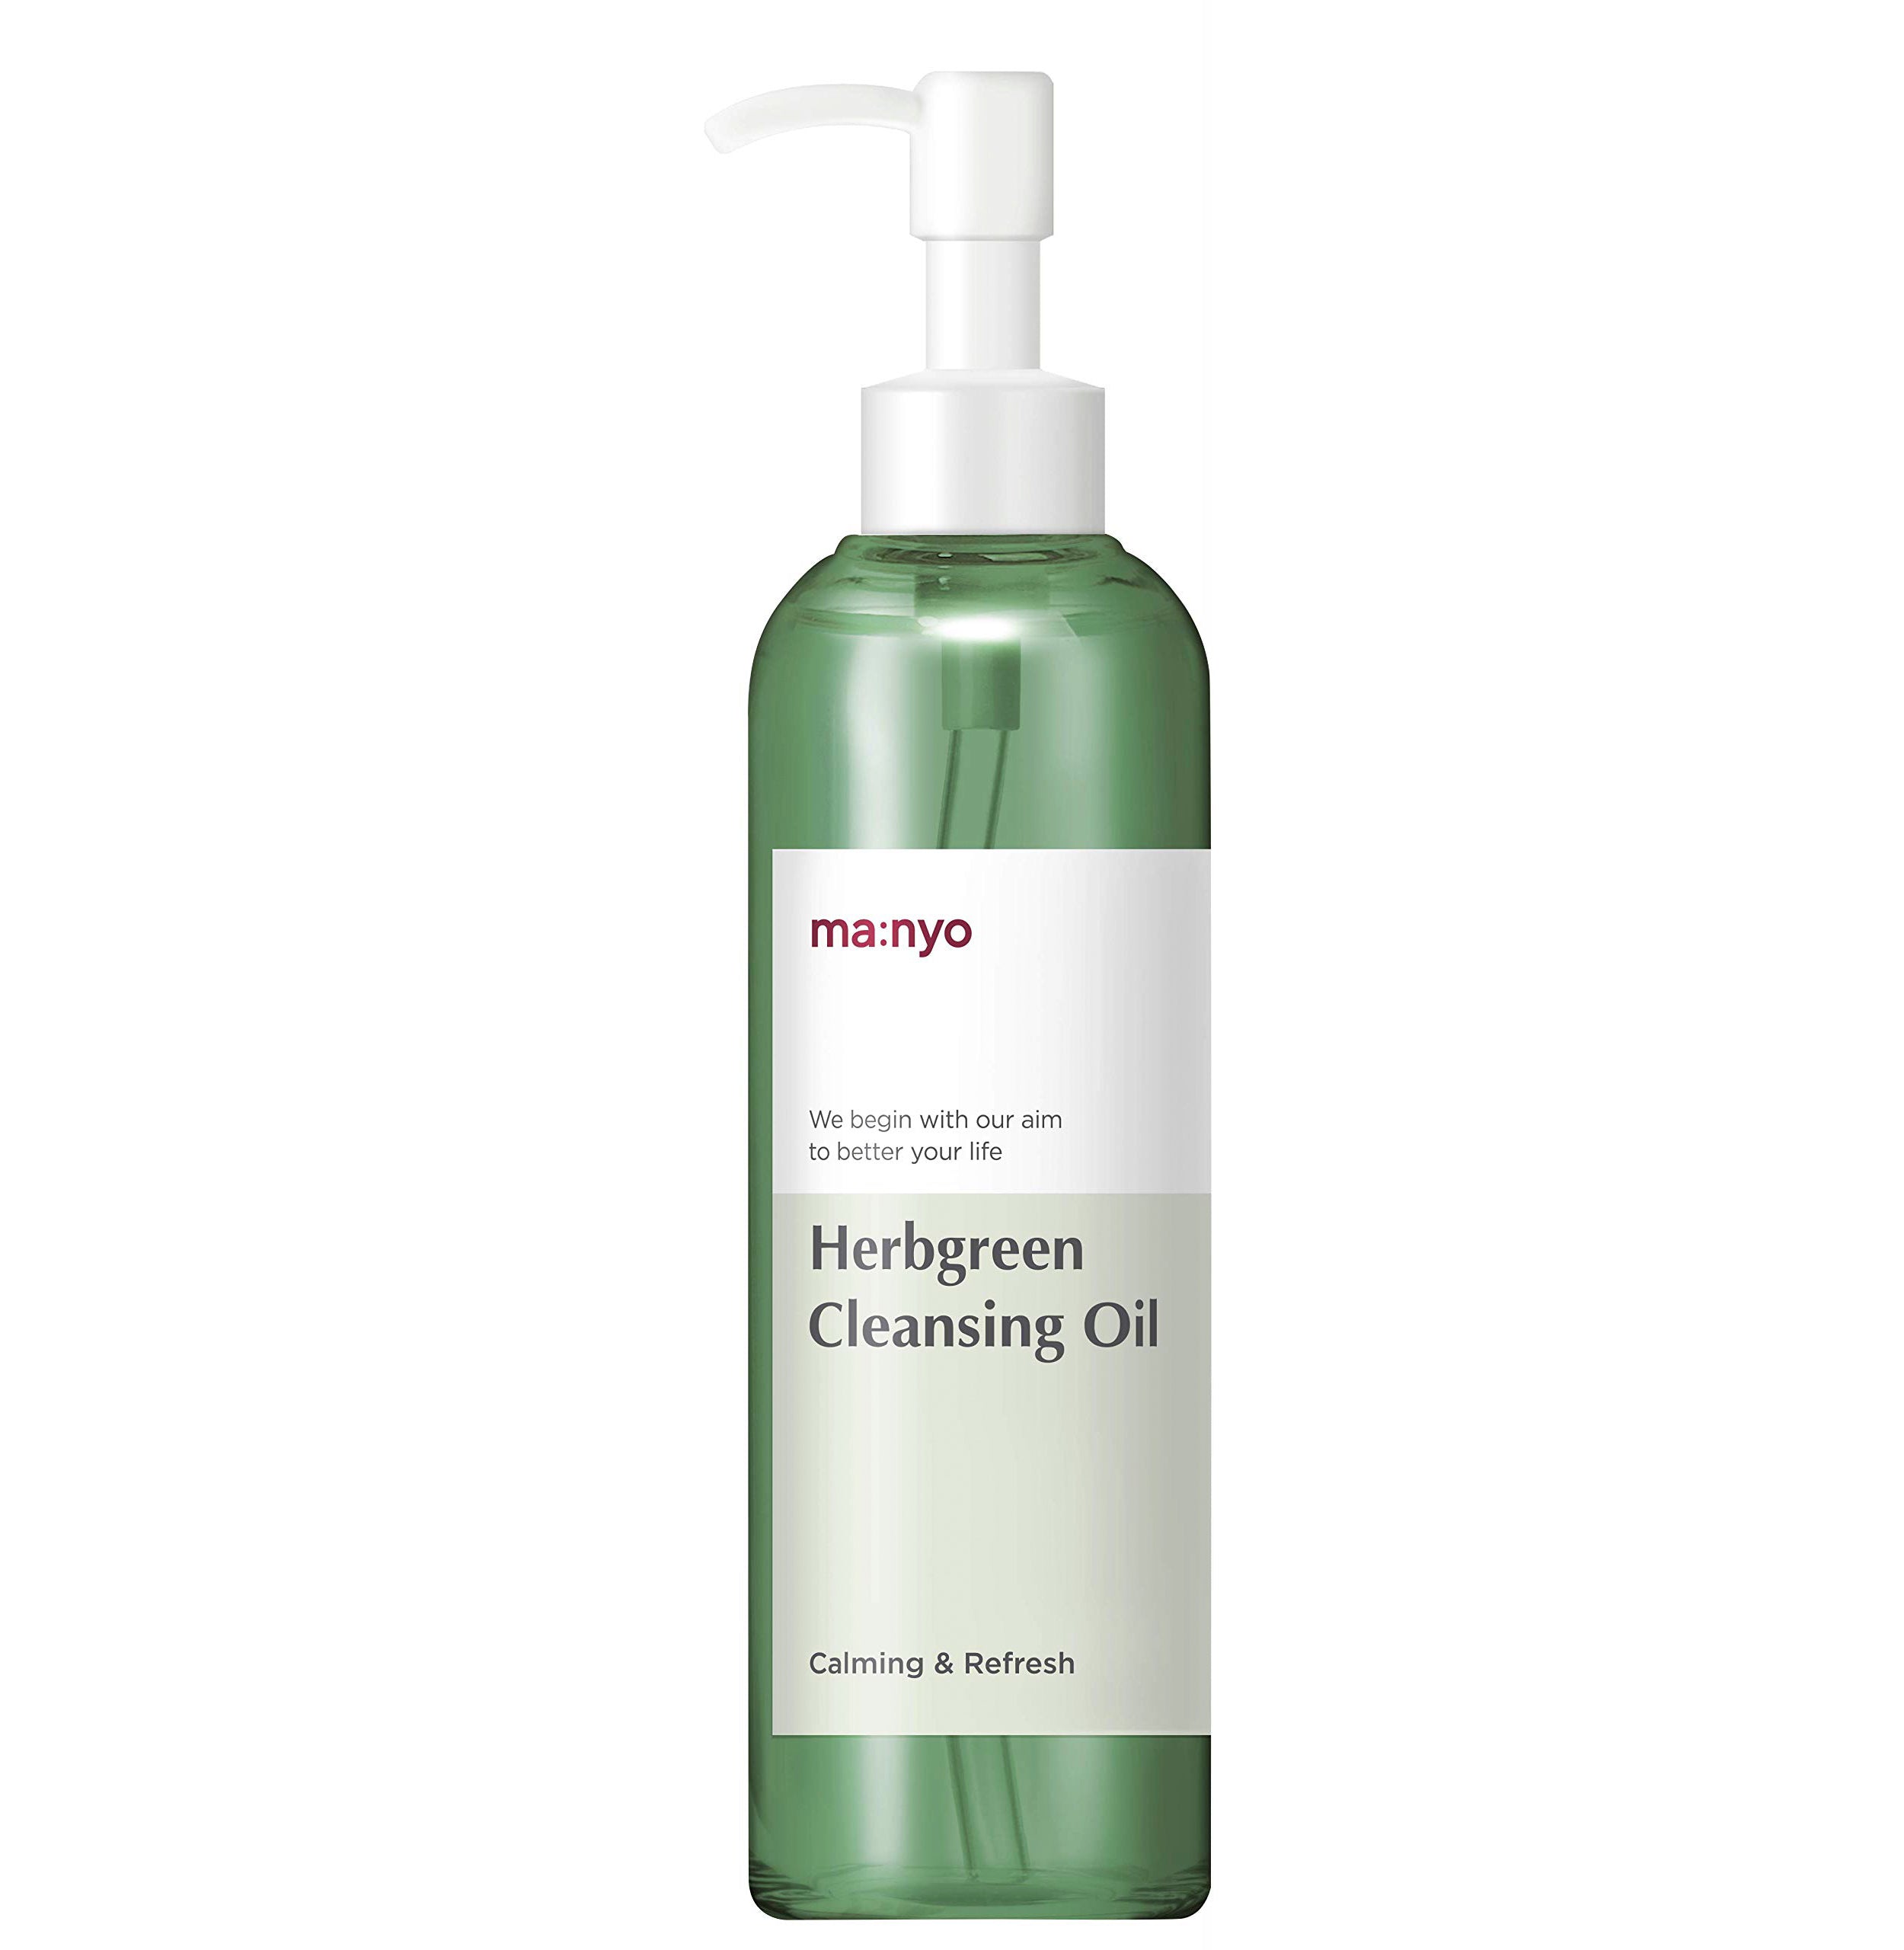 Manyo Factory Herb Green Cleansing Oil Beauty Manyo Factory   